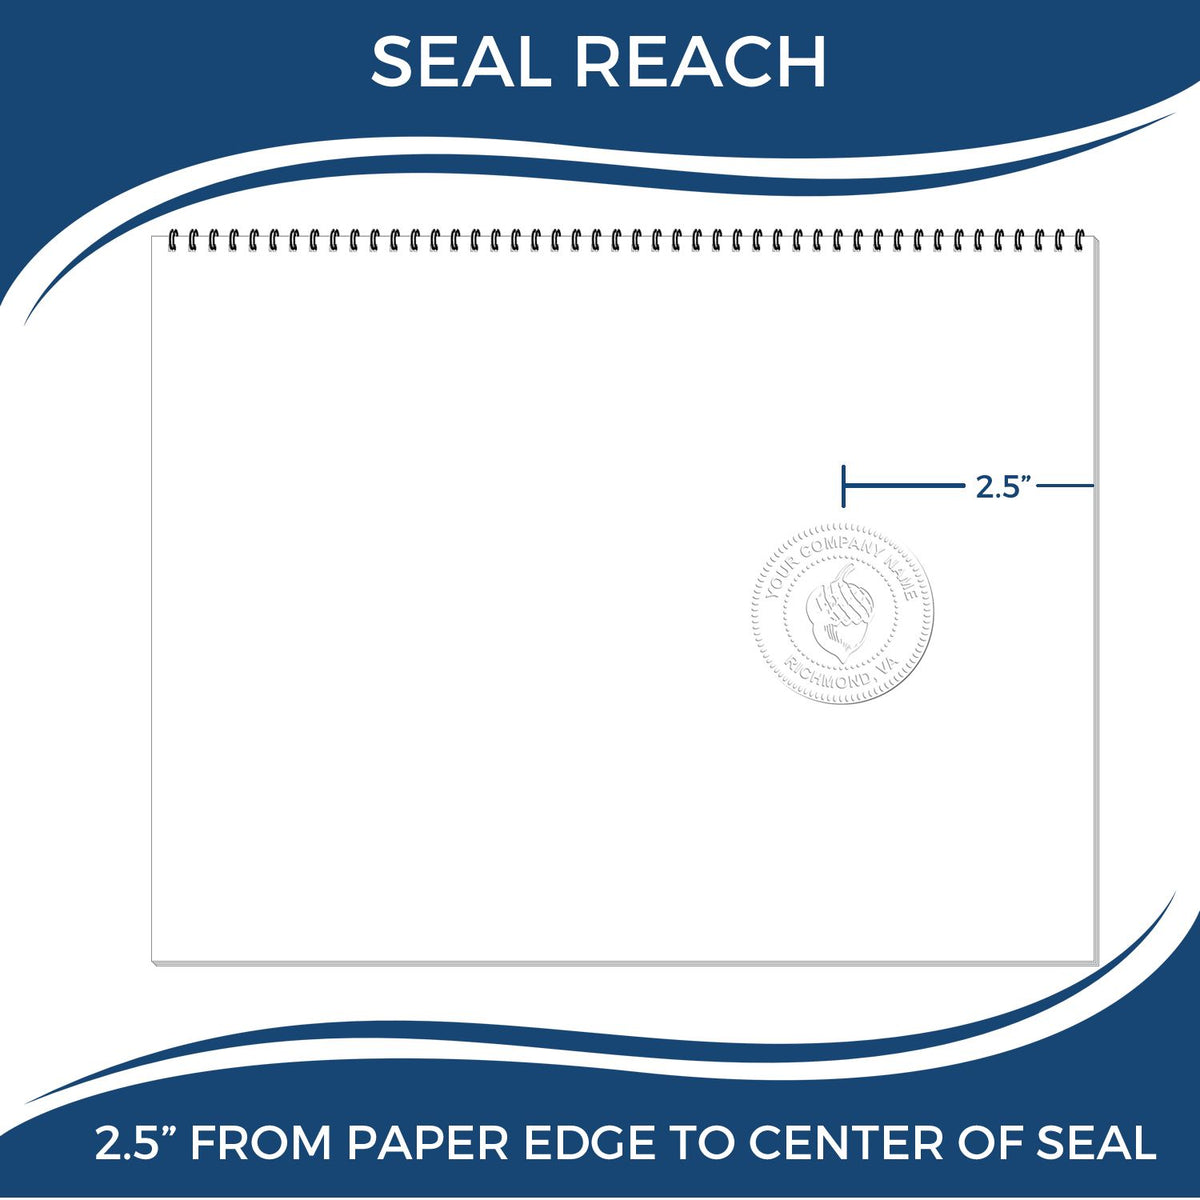 An infographic showing the seal reach which is represented by a ruler and a miniature seal image of the Heavy Duty Cast Iron Wyoming Engineer Seal Embosser